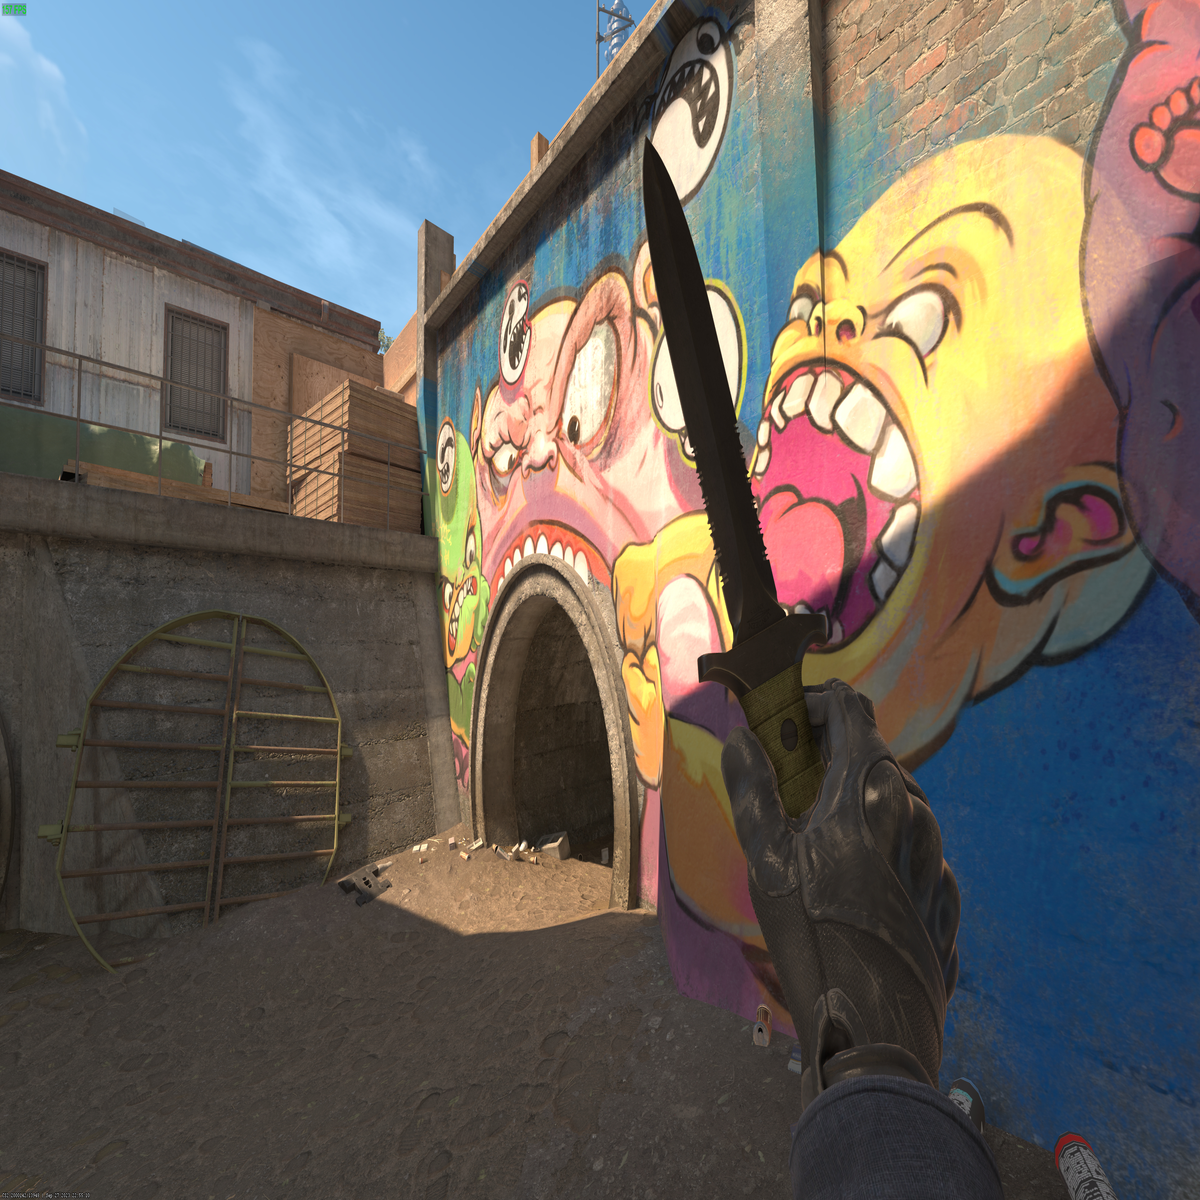 Counter-Strike 2 performance guide: best settings, fps boost